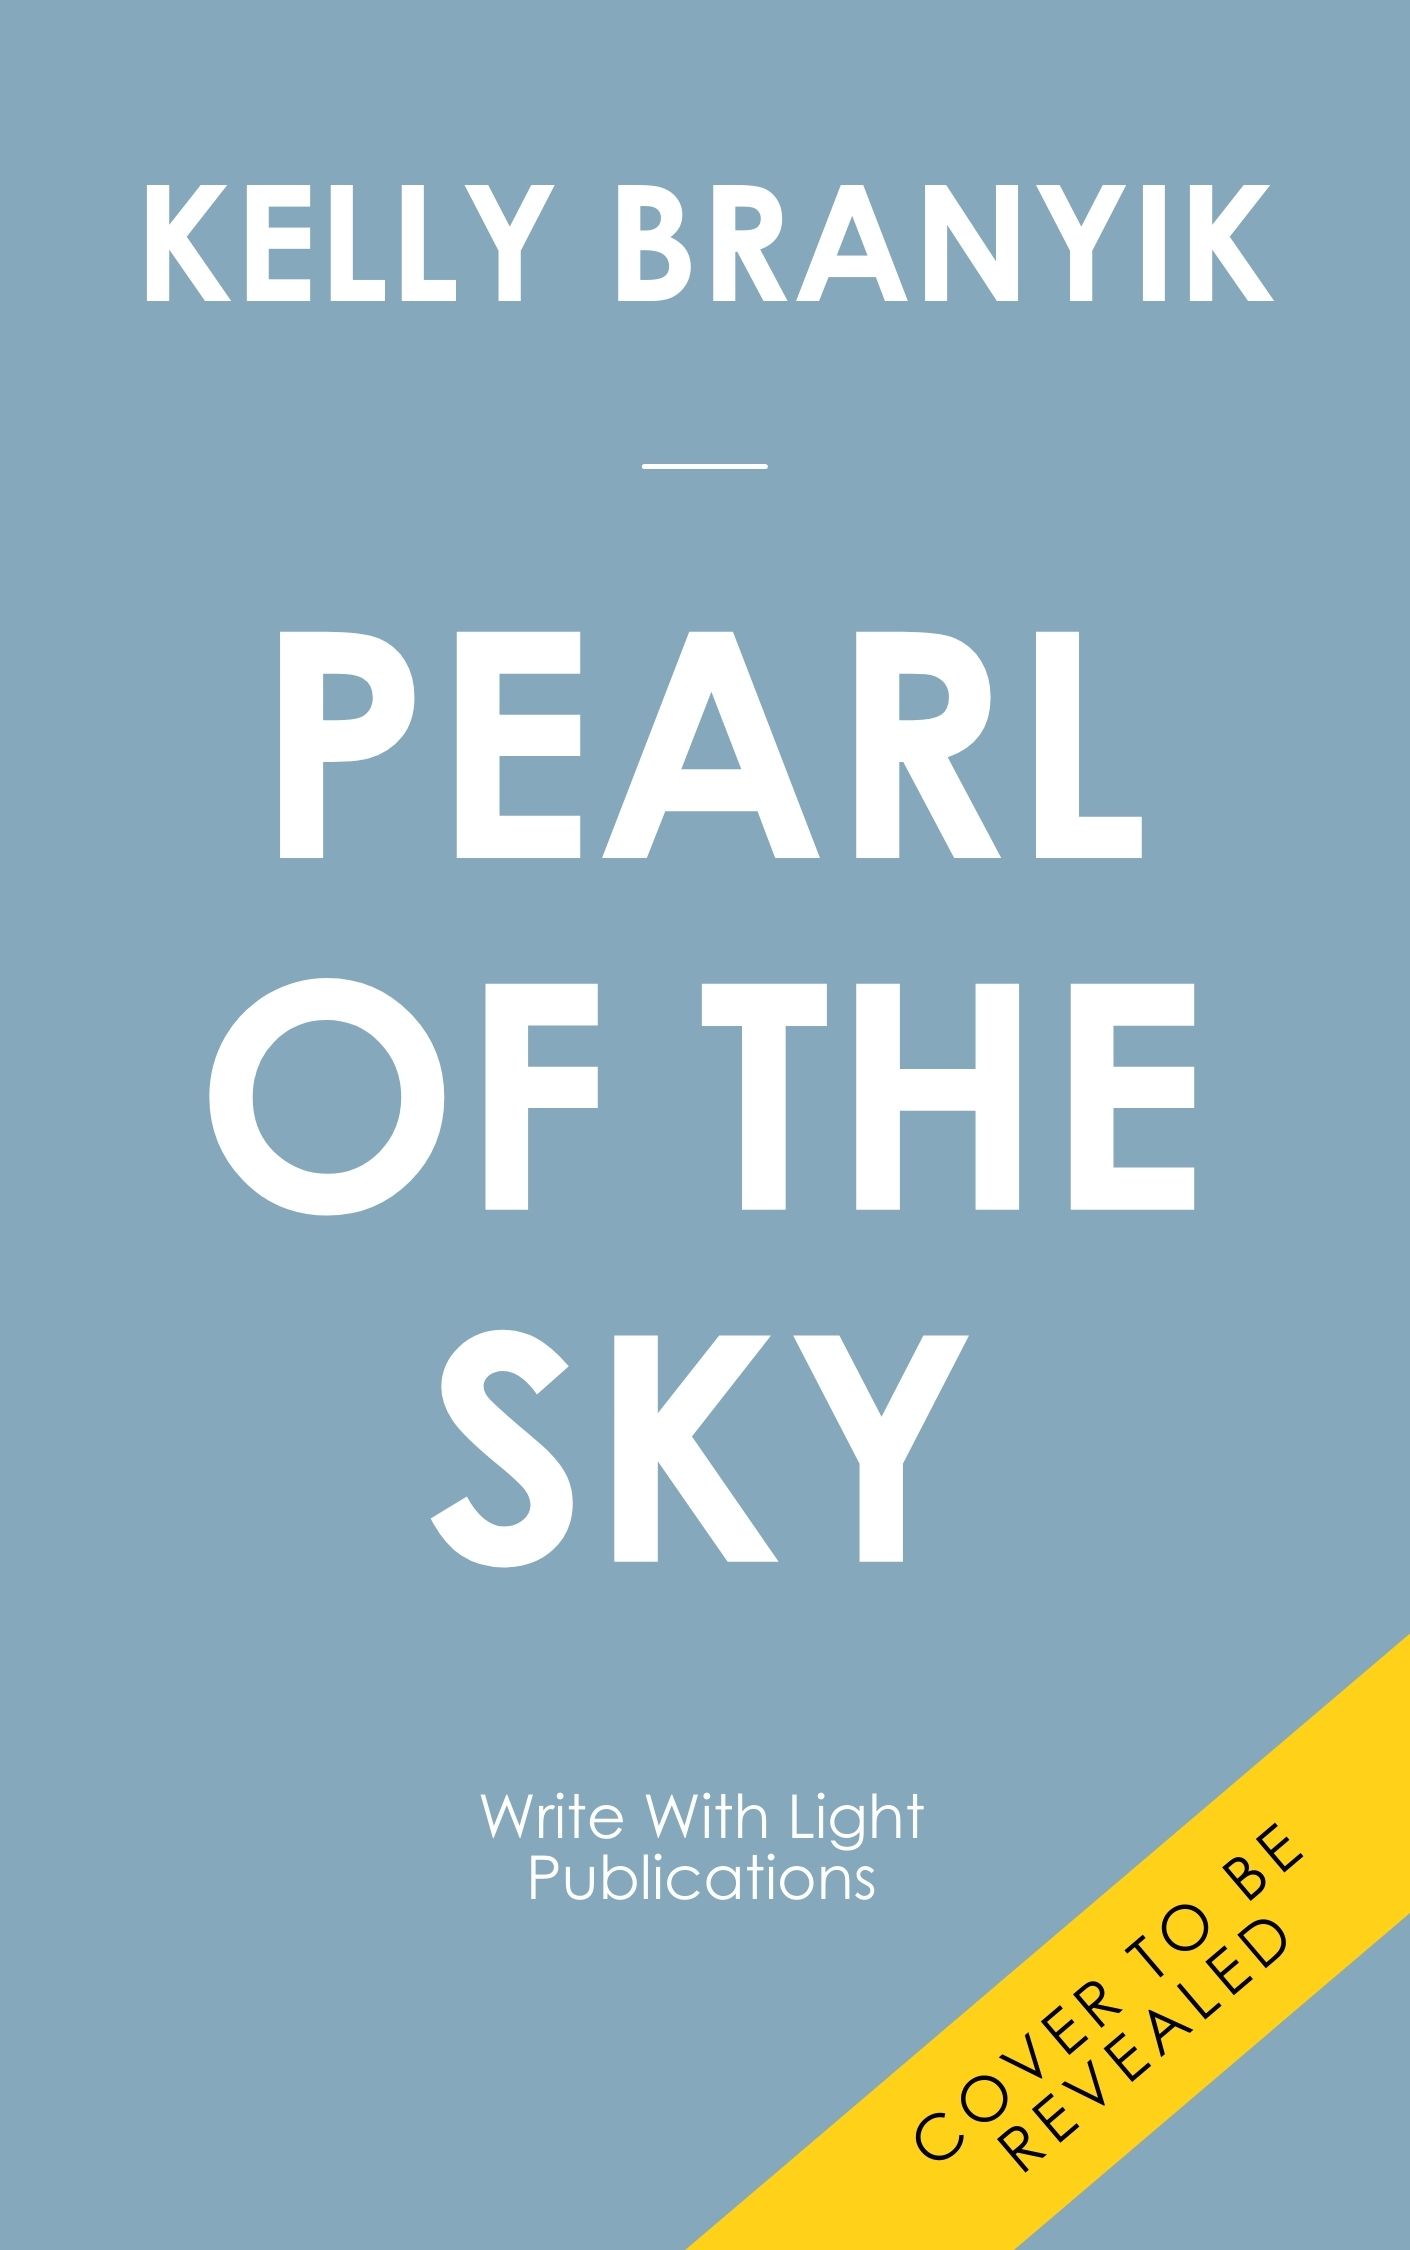 The Pearl of the Sky by Kelly Branyik